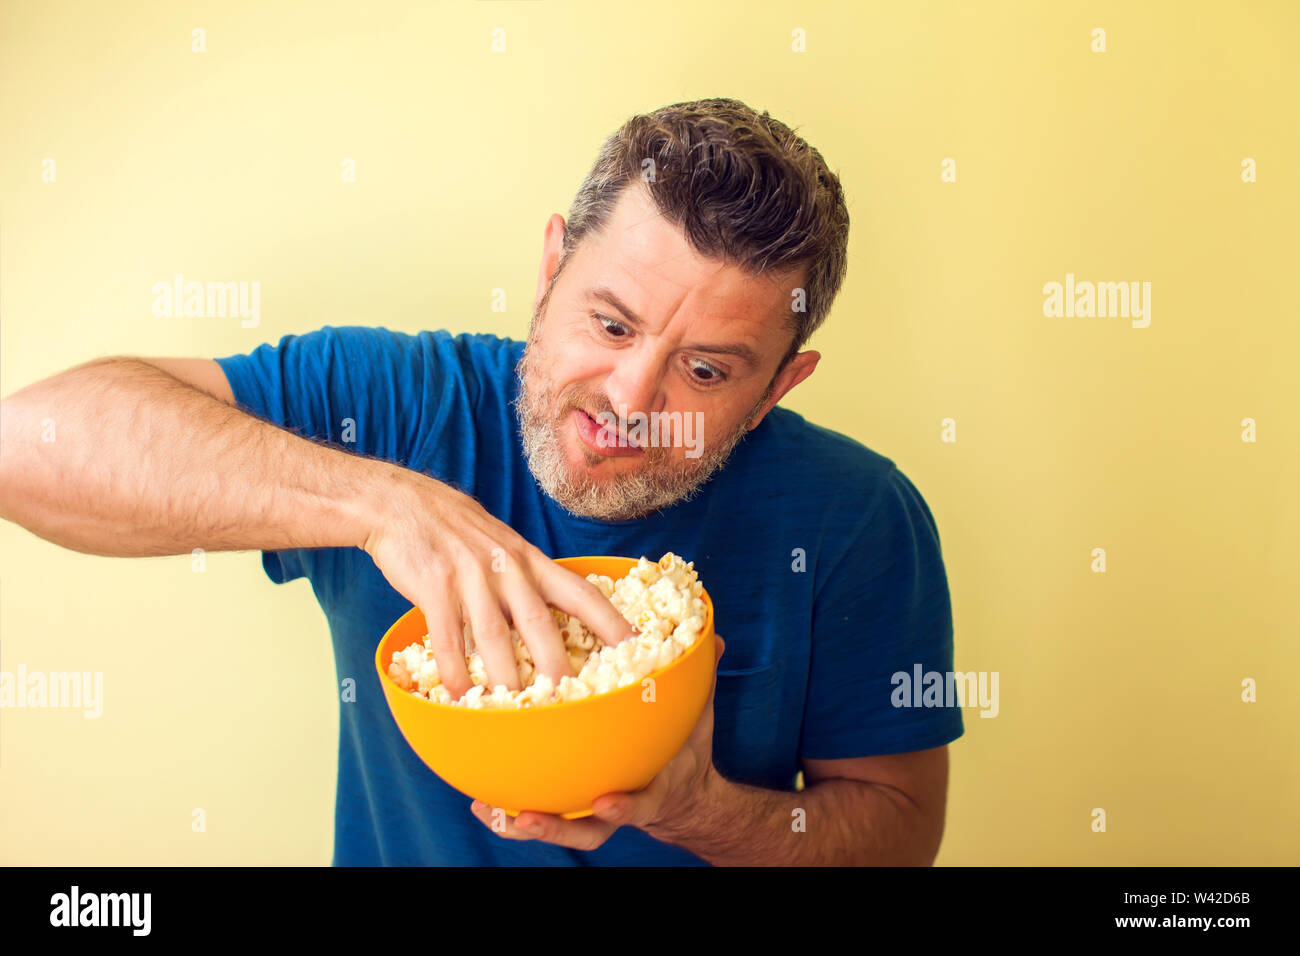 Portrait of a funny man eating popcorn over yellow background Stock Photo